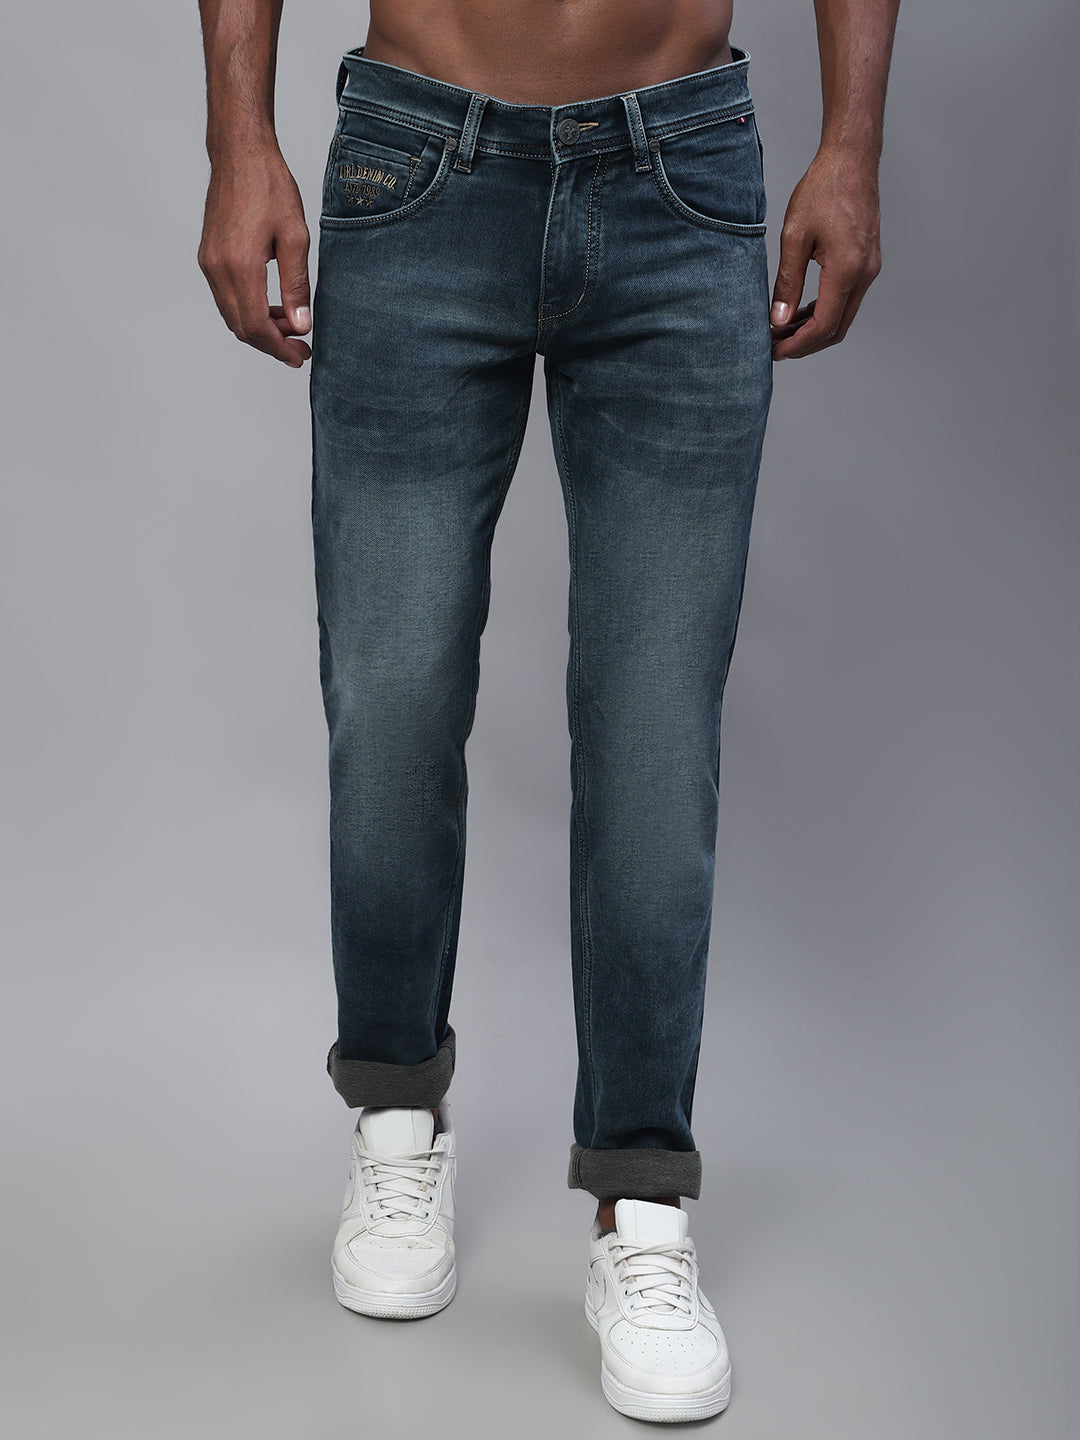 Buy HERE&NOW Men Green Slim Fit Light Fade Stretchable Jeans - Jeans for  Men 15324802 | Myntra